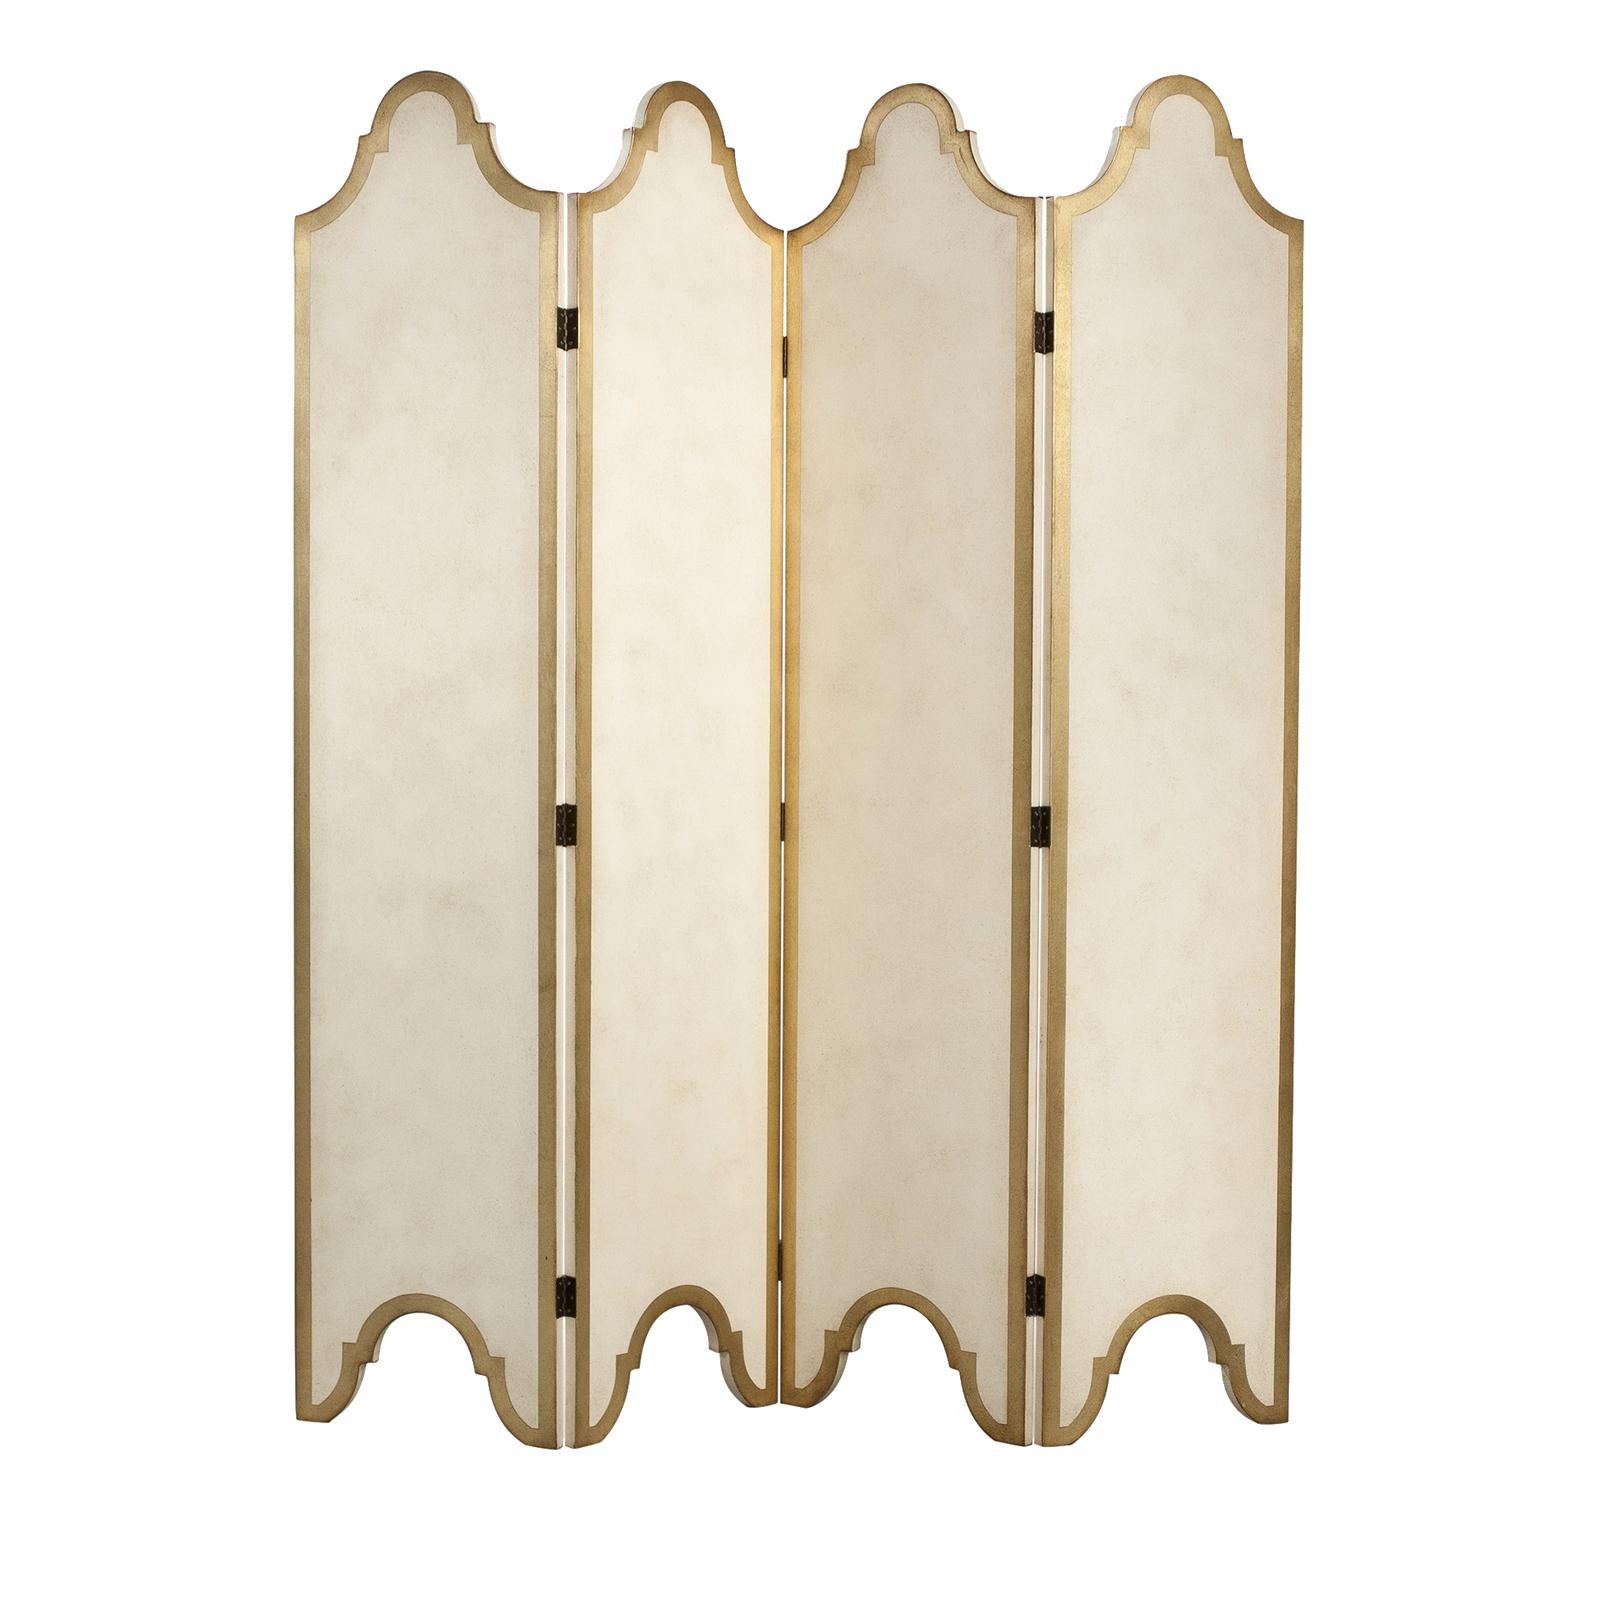 With its sophisticated gold-and-ivory color combination, this hand painted screen evokes the luxury of 18th century Venetian style. Composed of four hinged panels, each with an arched top that mirrors the carved shape at the bottom, this handcrafted